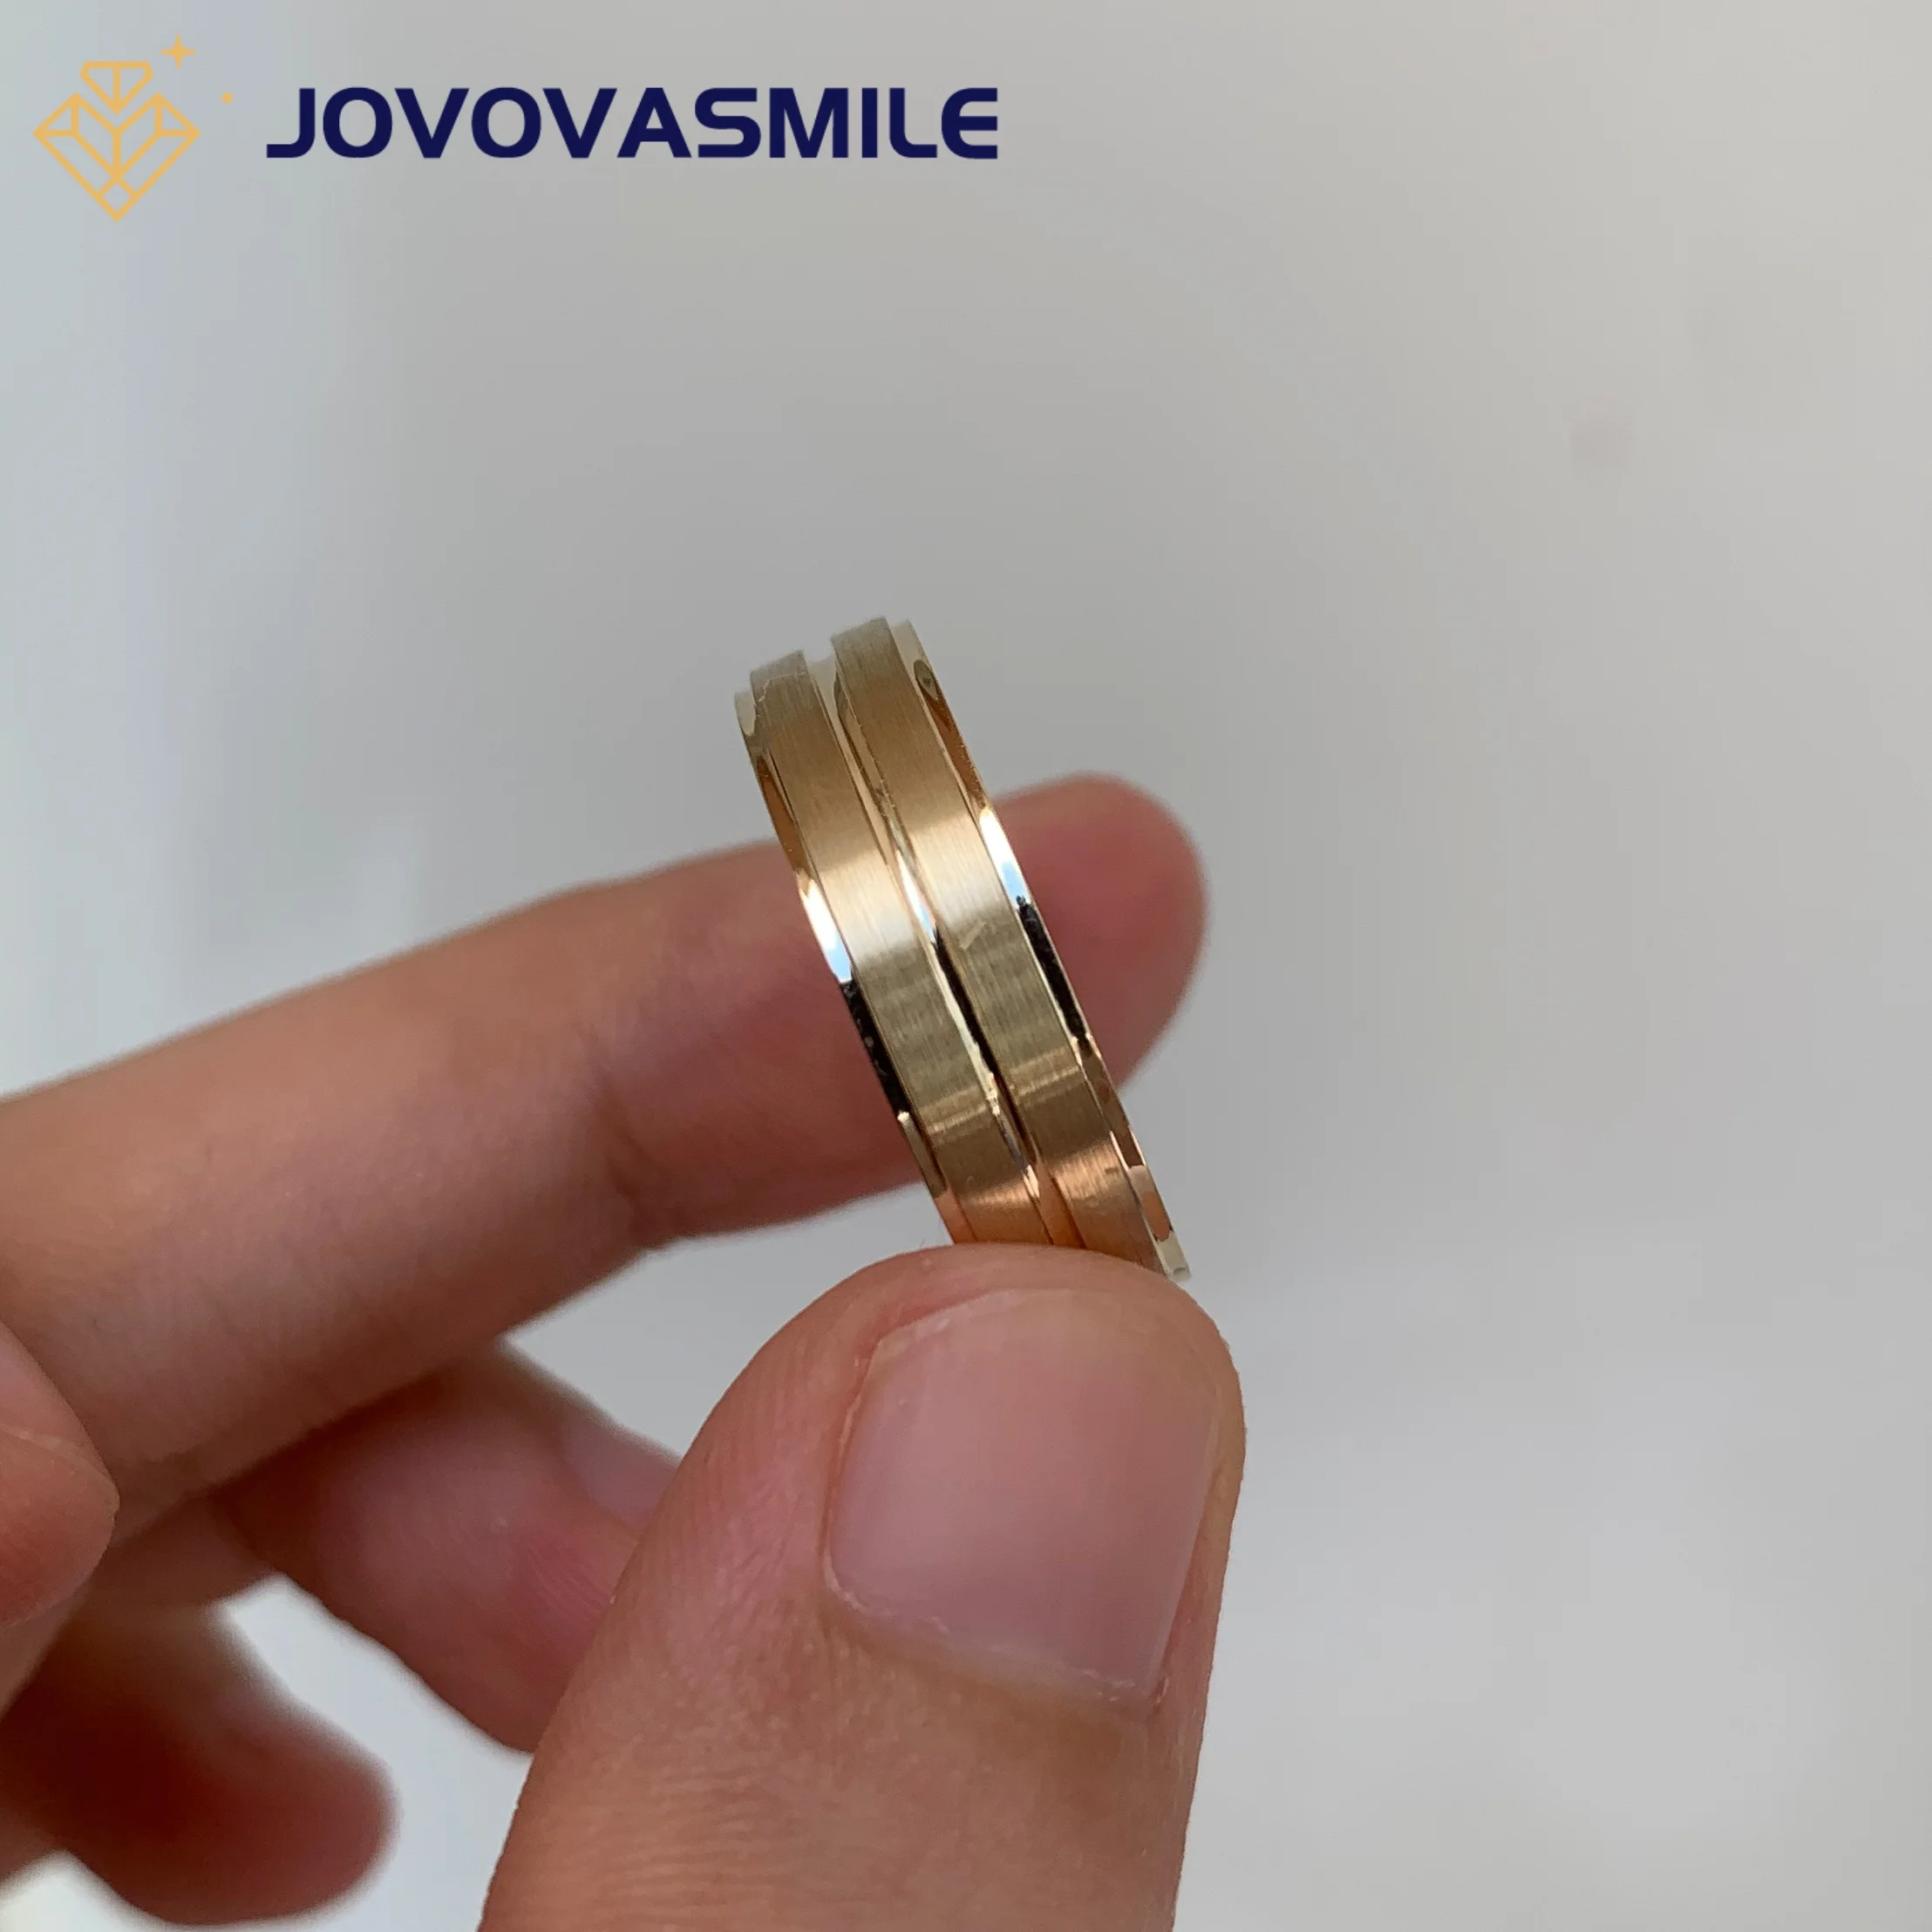 JOVOVASMILE 9K 14K 18K Yellow Gold Man Wedding Engagement Rings Bridegroom Jewelry with Certificate business men suits for wedding smart casual bridegroom custom slim fit formal blazer tuxedo costumes homme mariage 3pieces